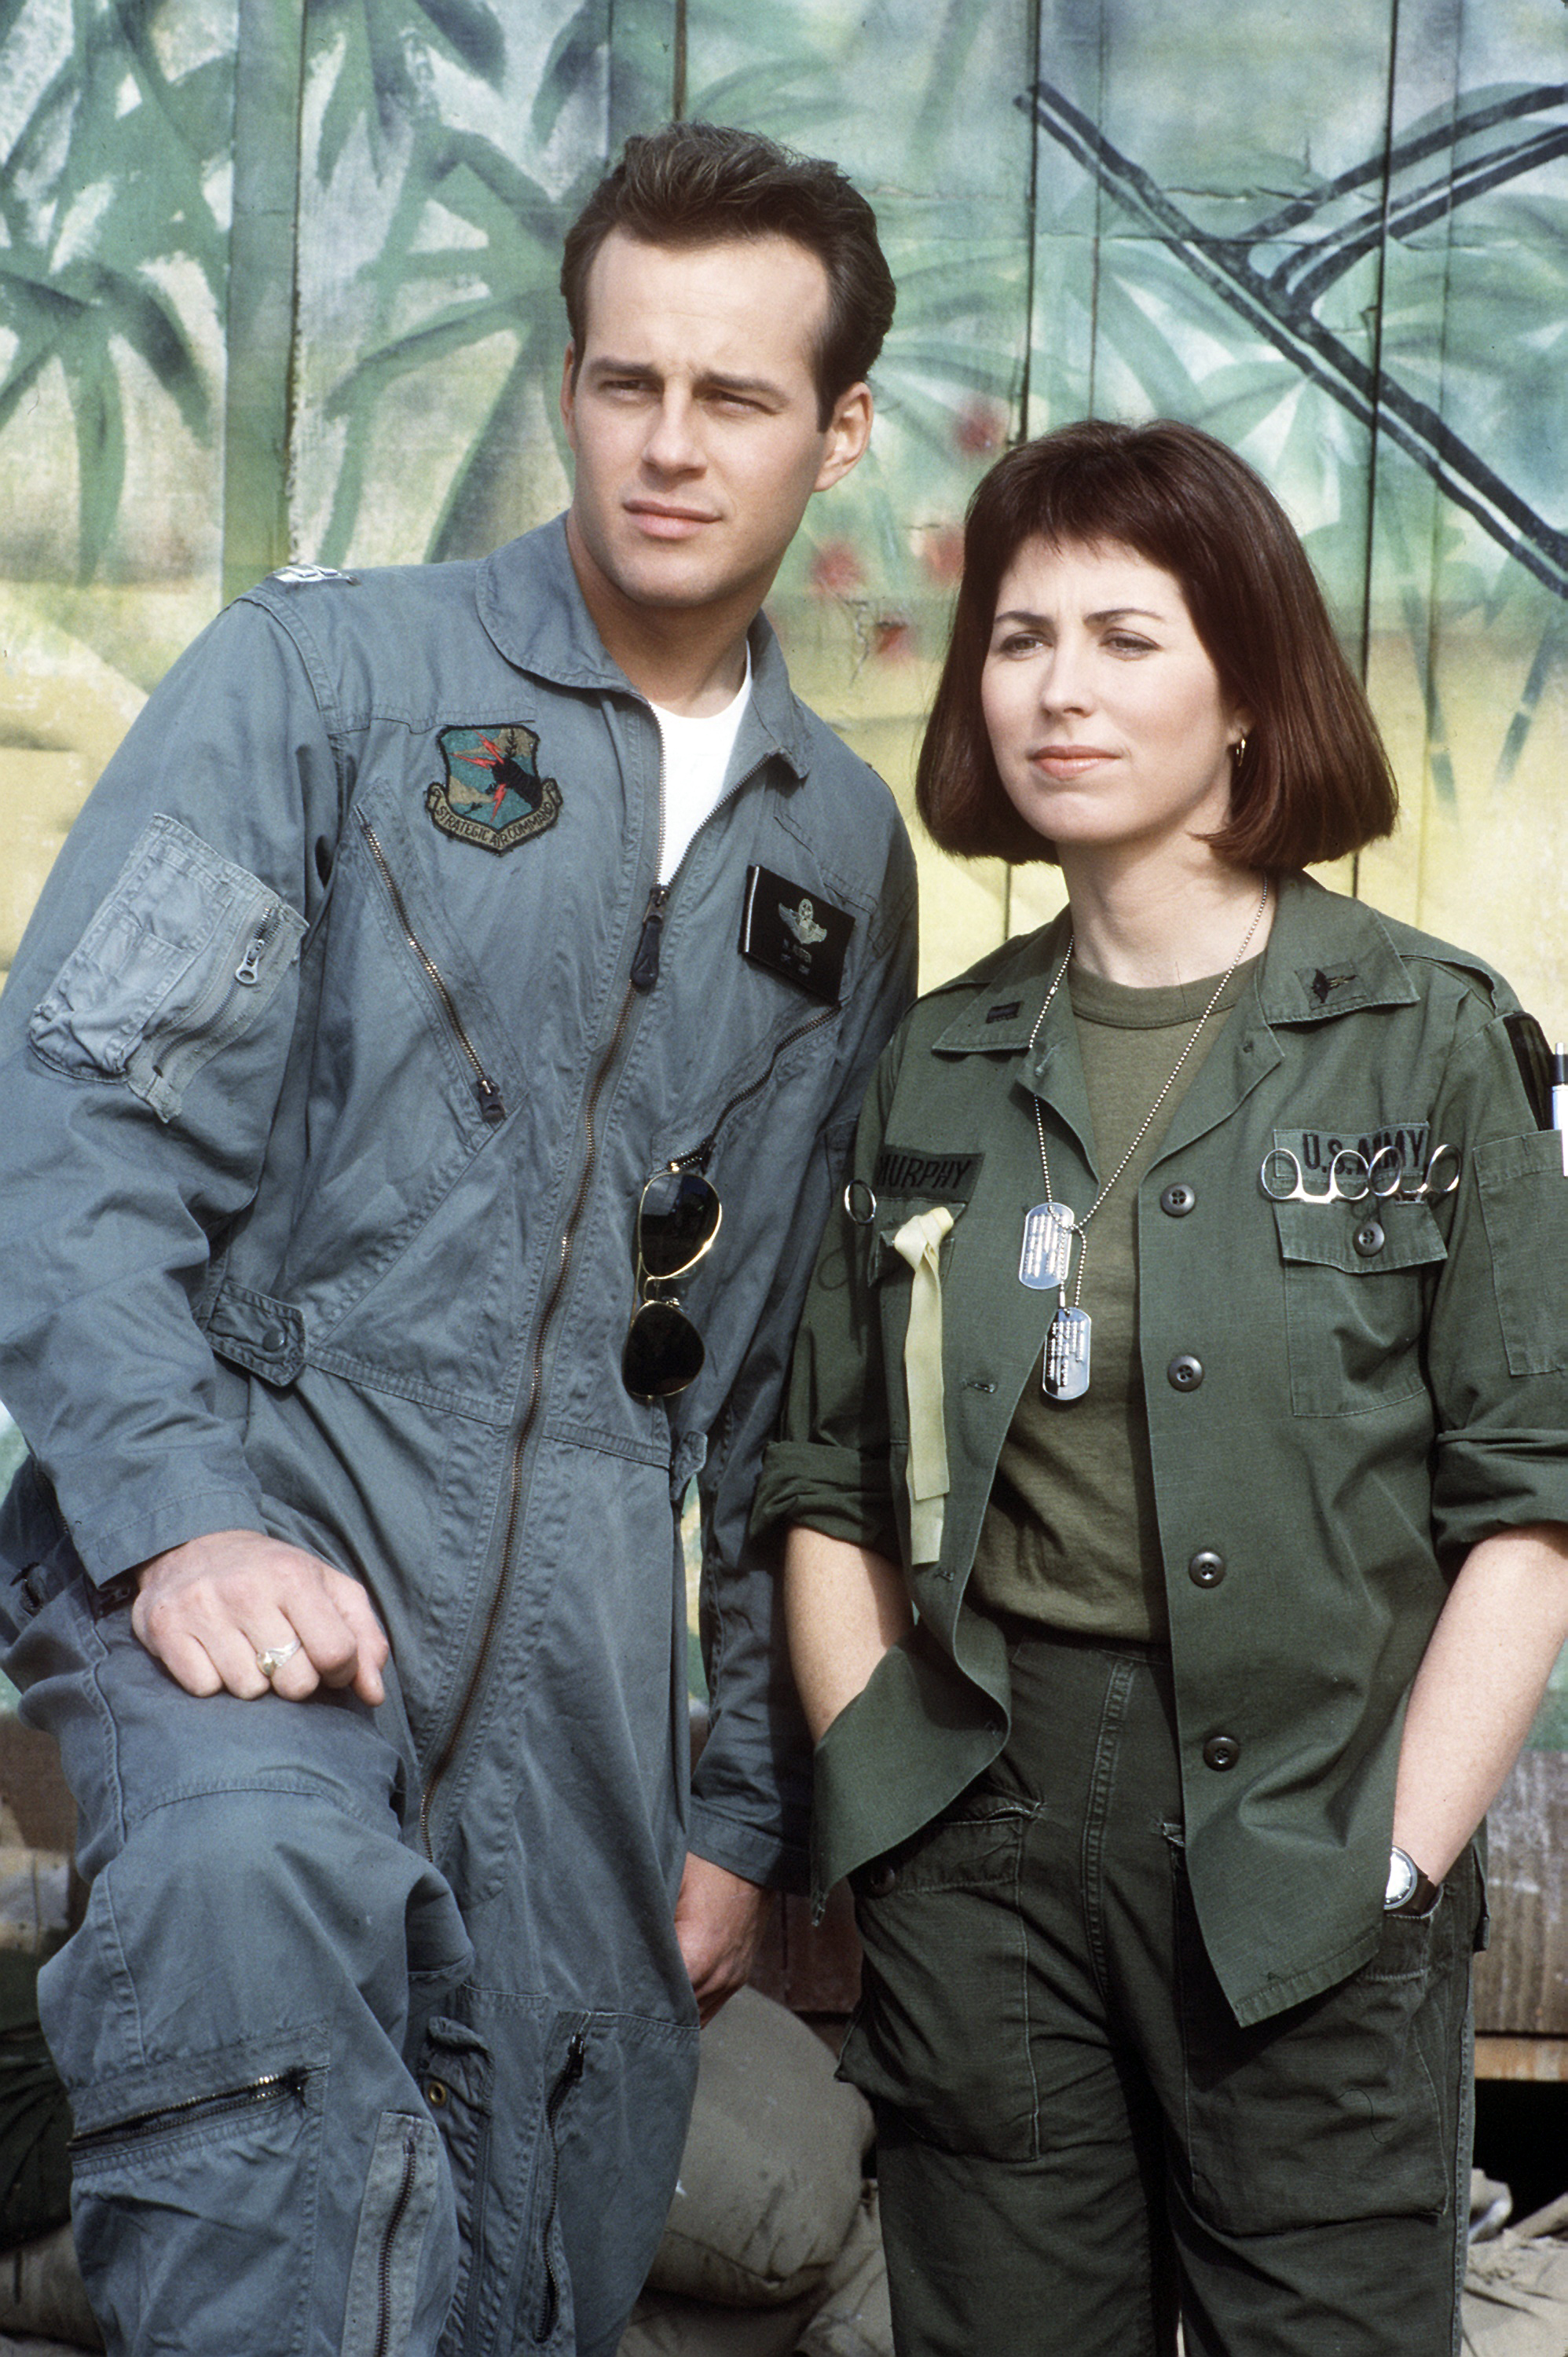 Tim Ryan as pilot Natch Austin and Dana Delany as Nurse Colleen McMurphy in the pilot epiode of "China Beach" on April 26, 1988. | Source: Getty Images